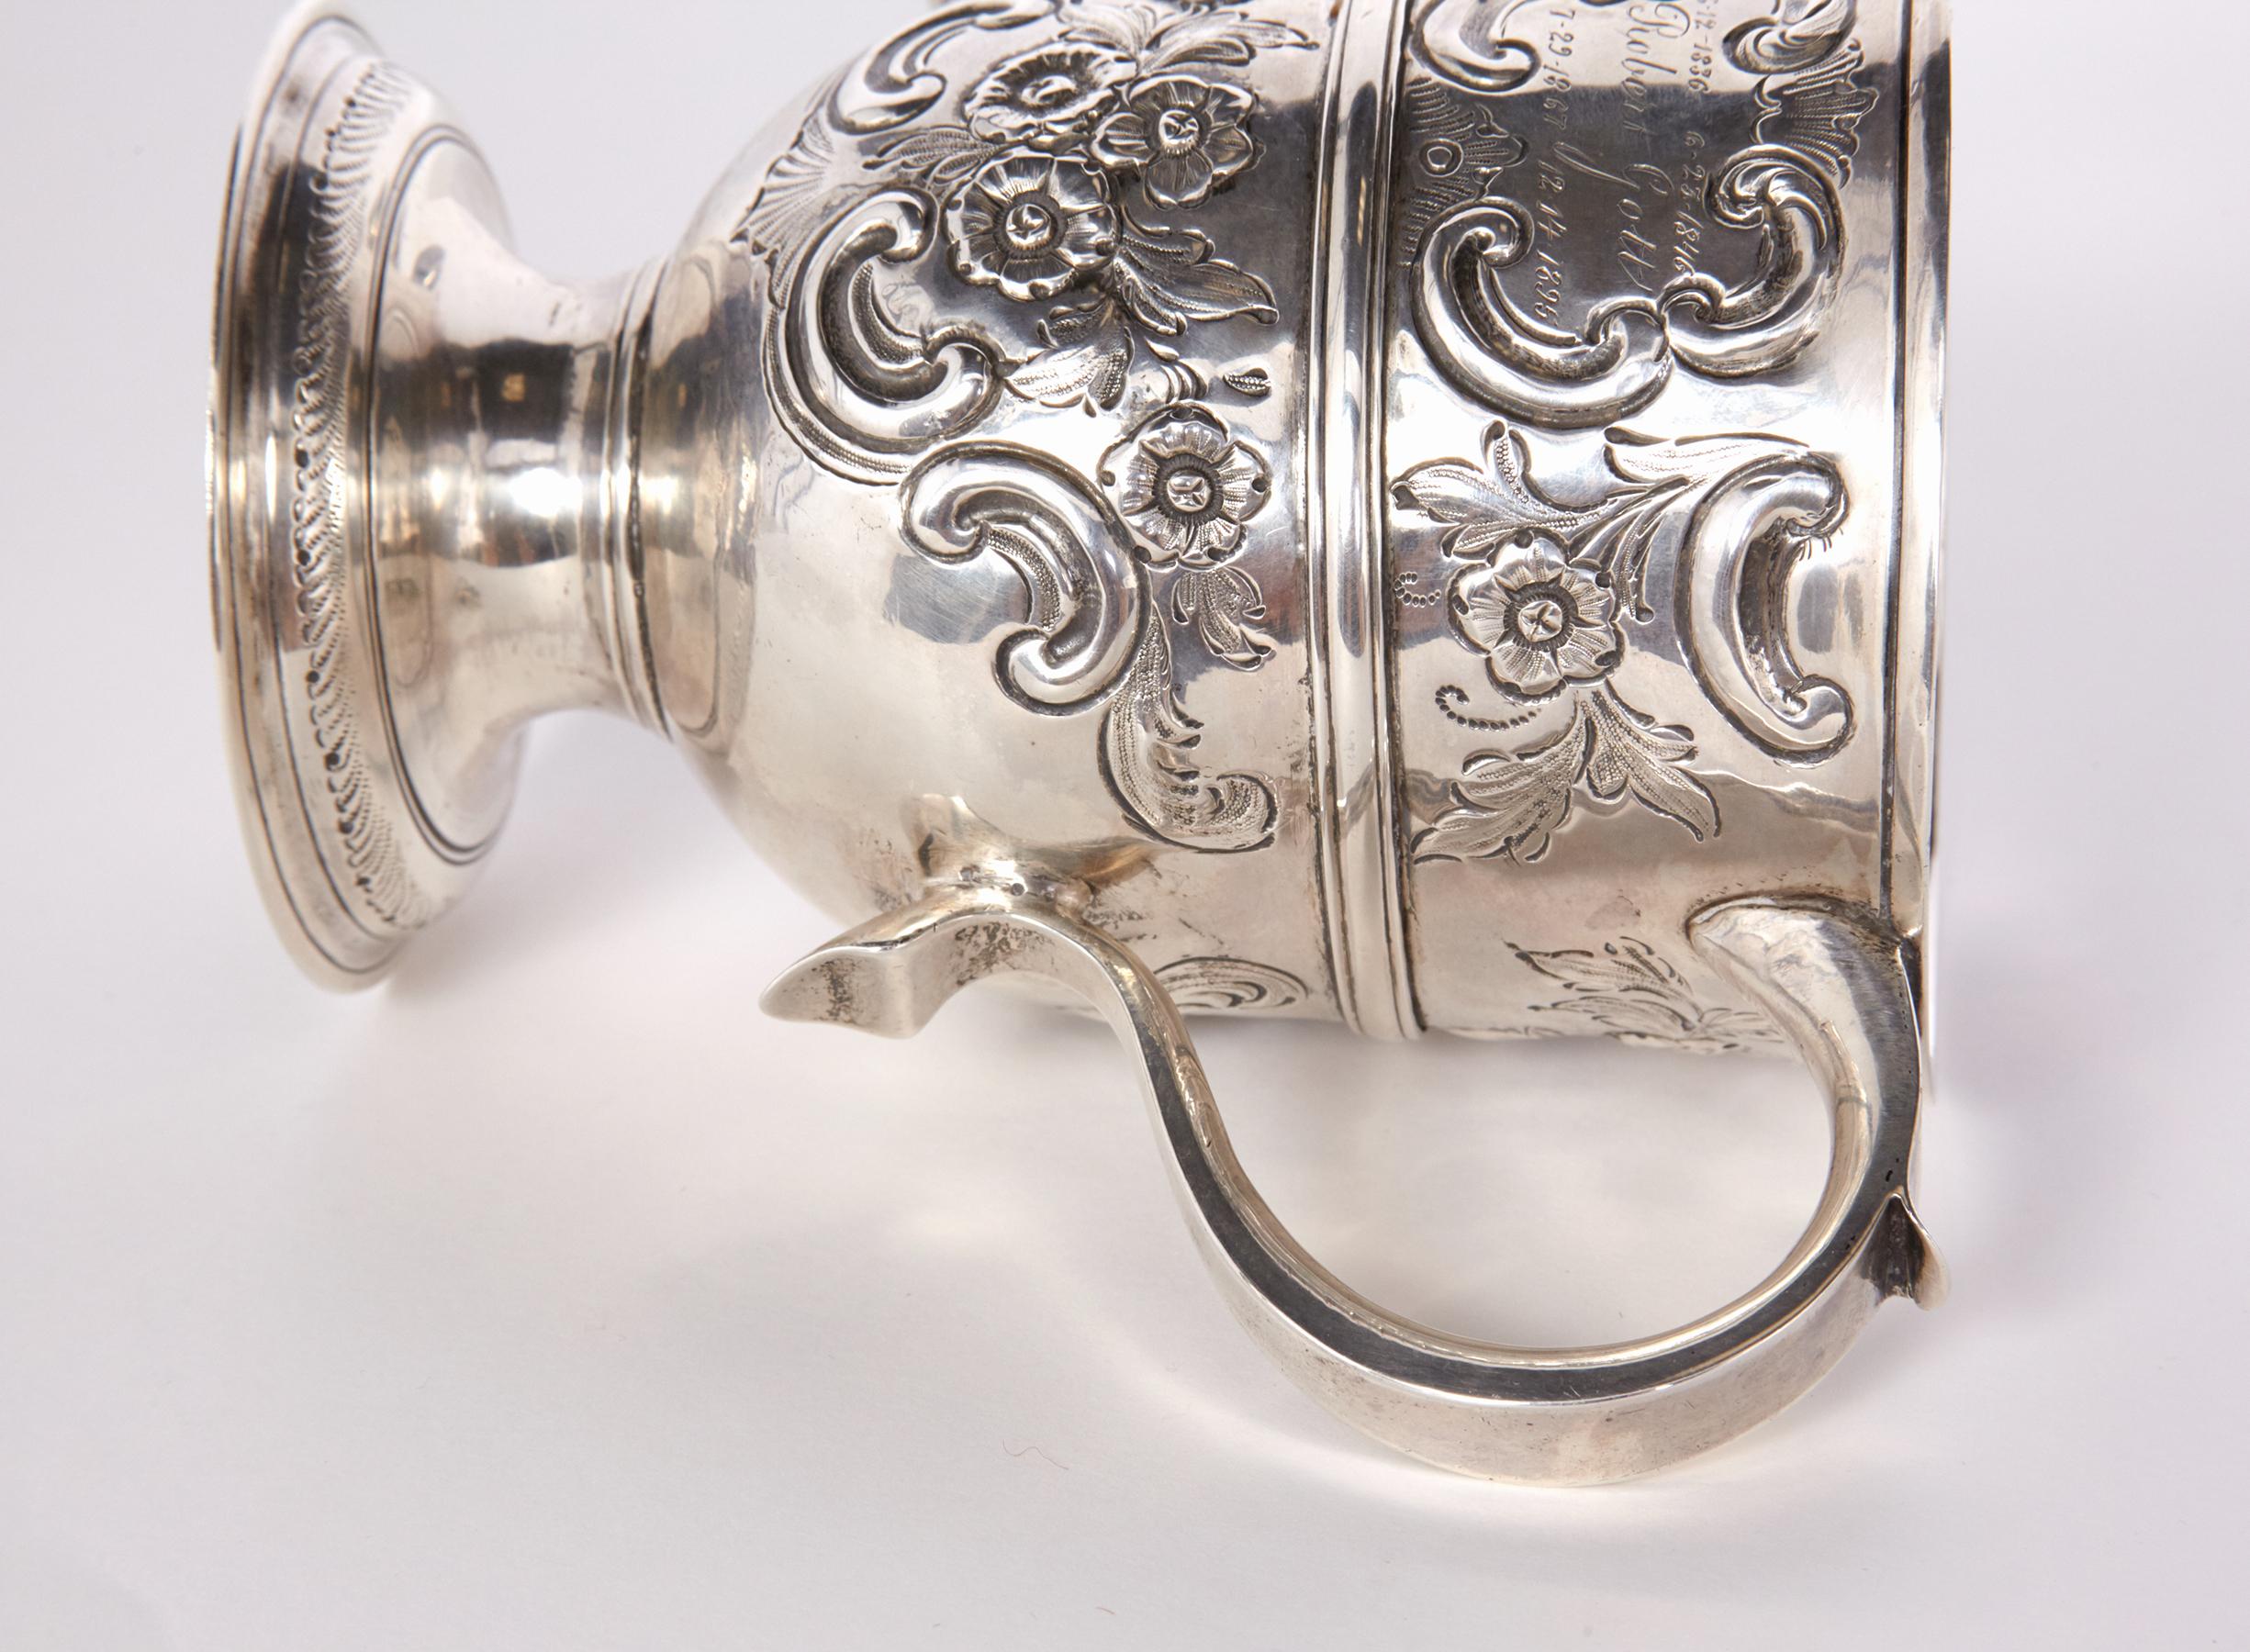 Sterling Silver 2-Handled Loving Cup 1762, London by Thomas Whipham 3